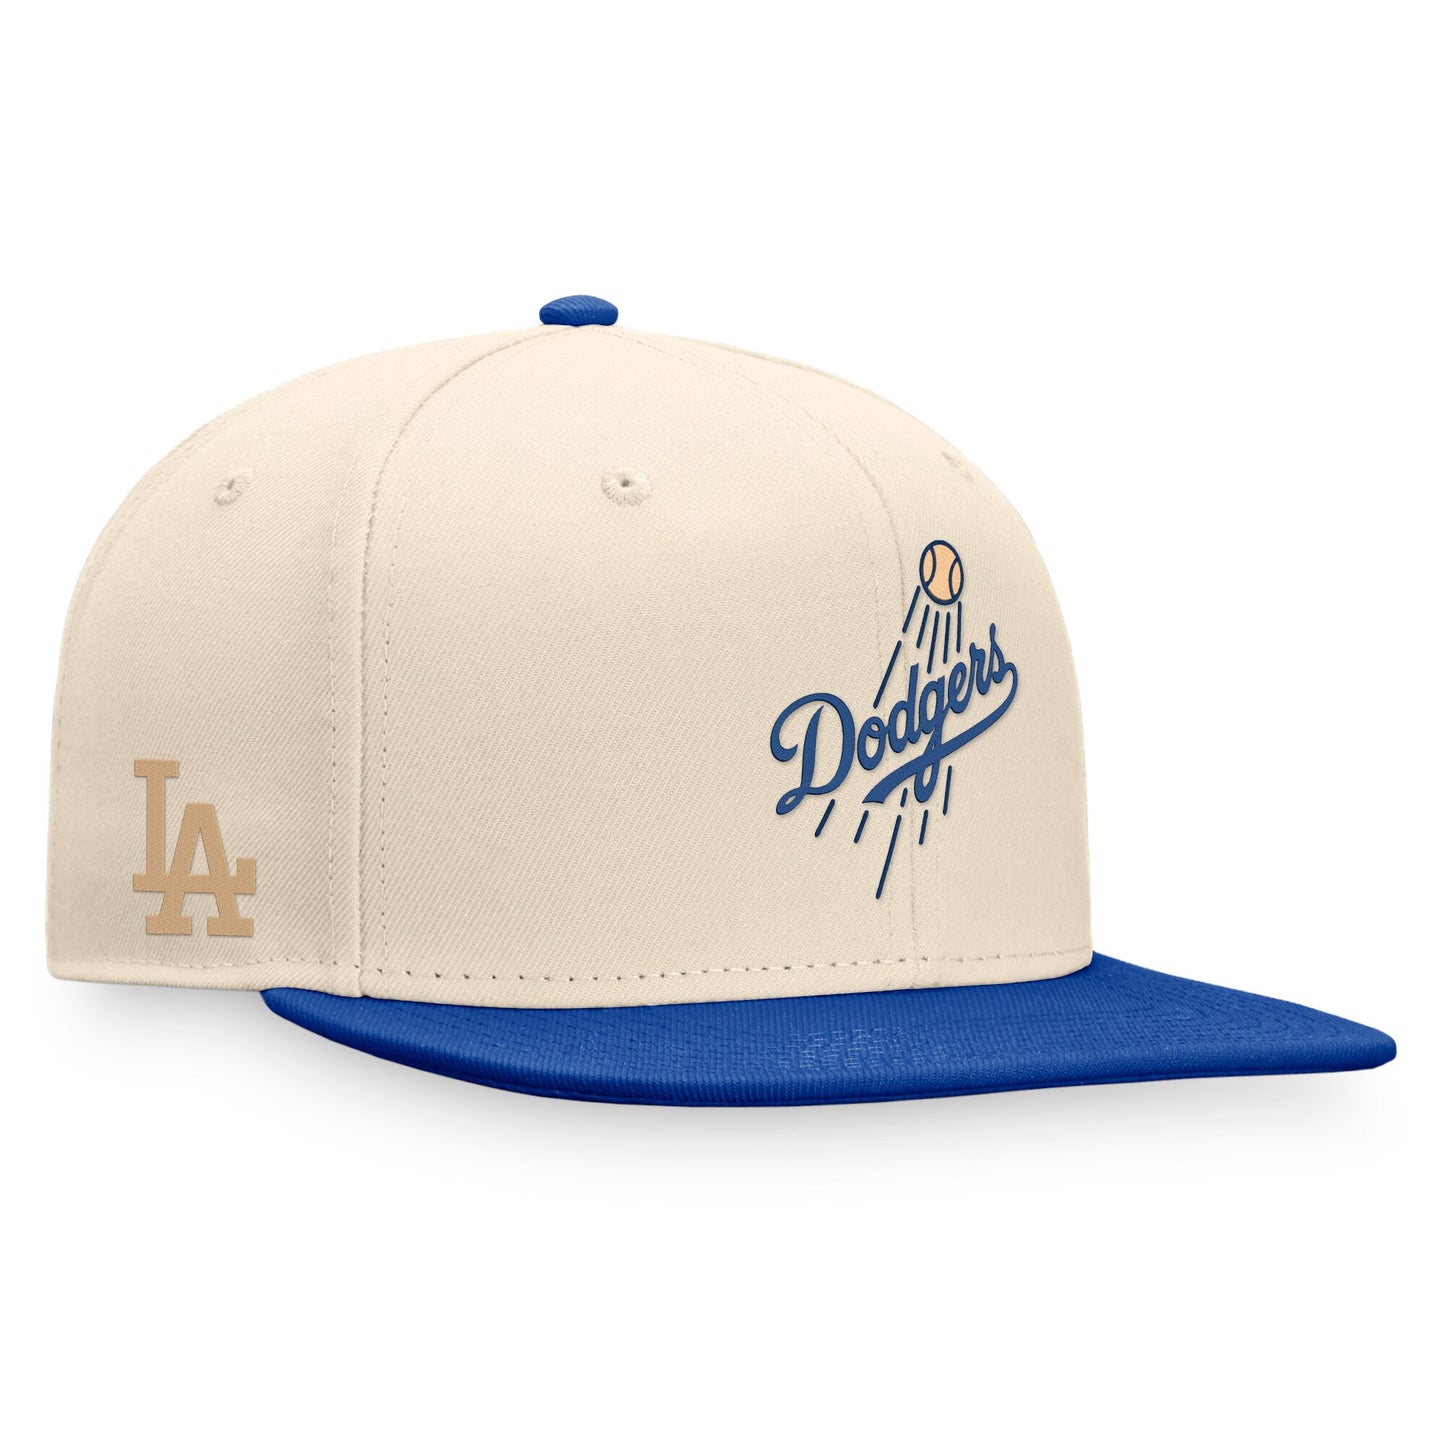 Los Angeles Dodgers Fanatics Branded Fitted Hat - Natural/Royal